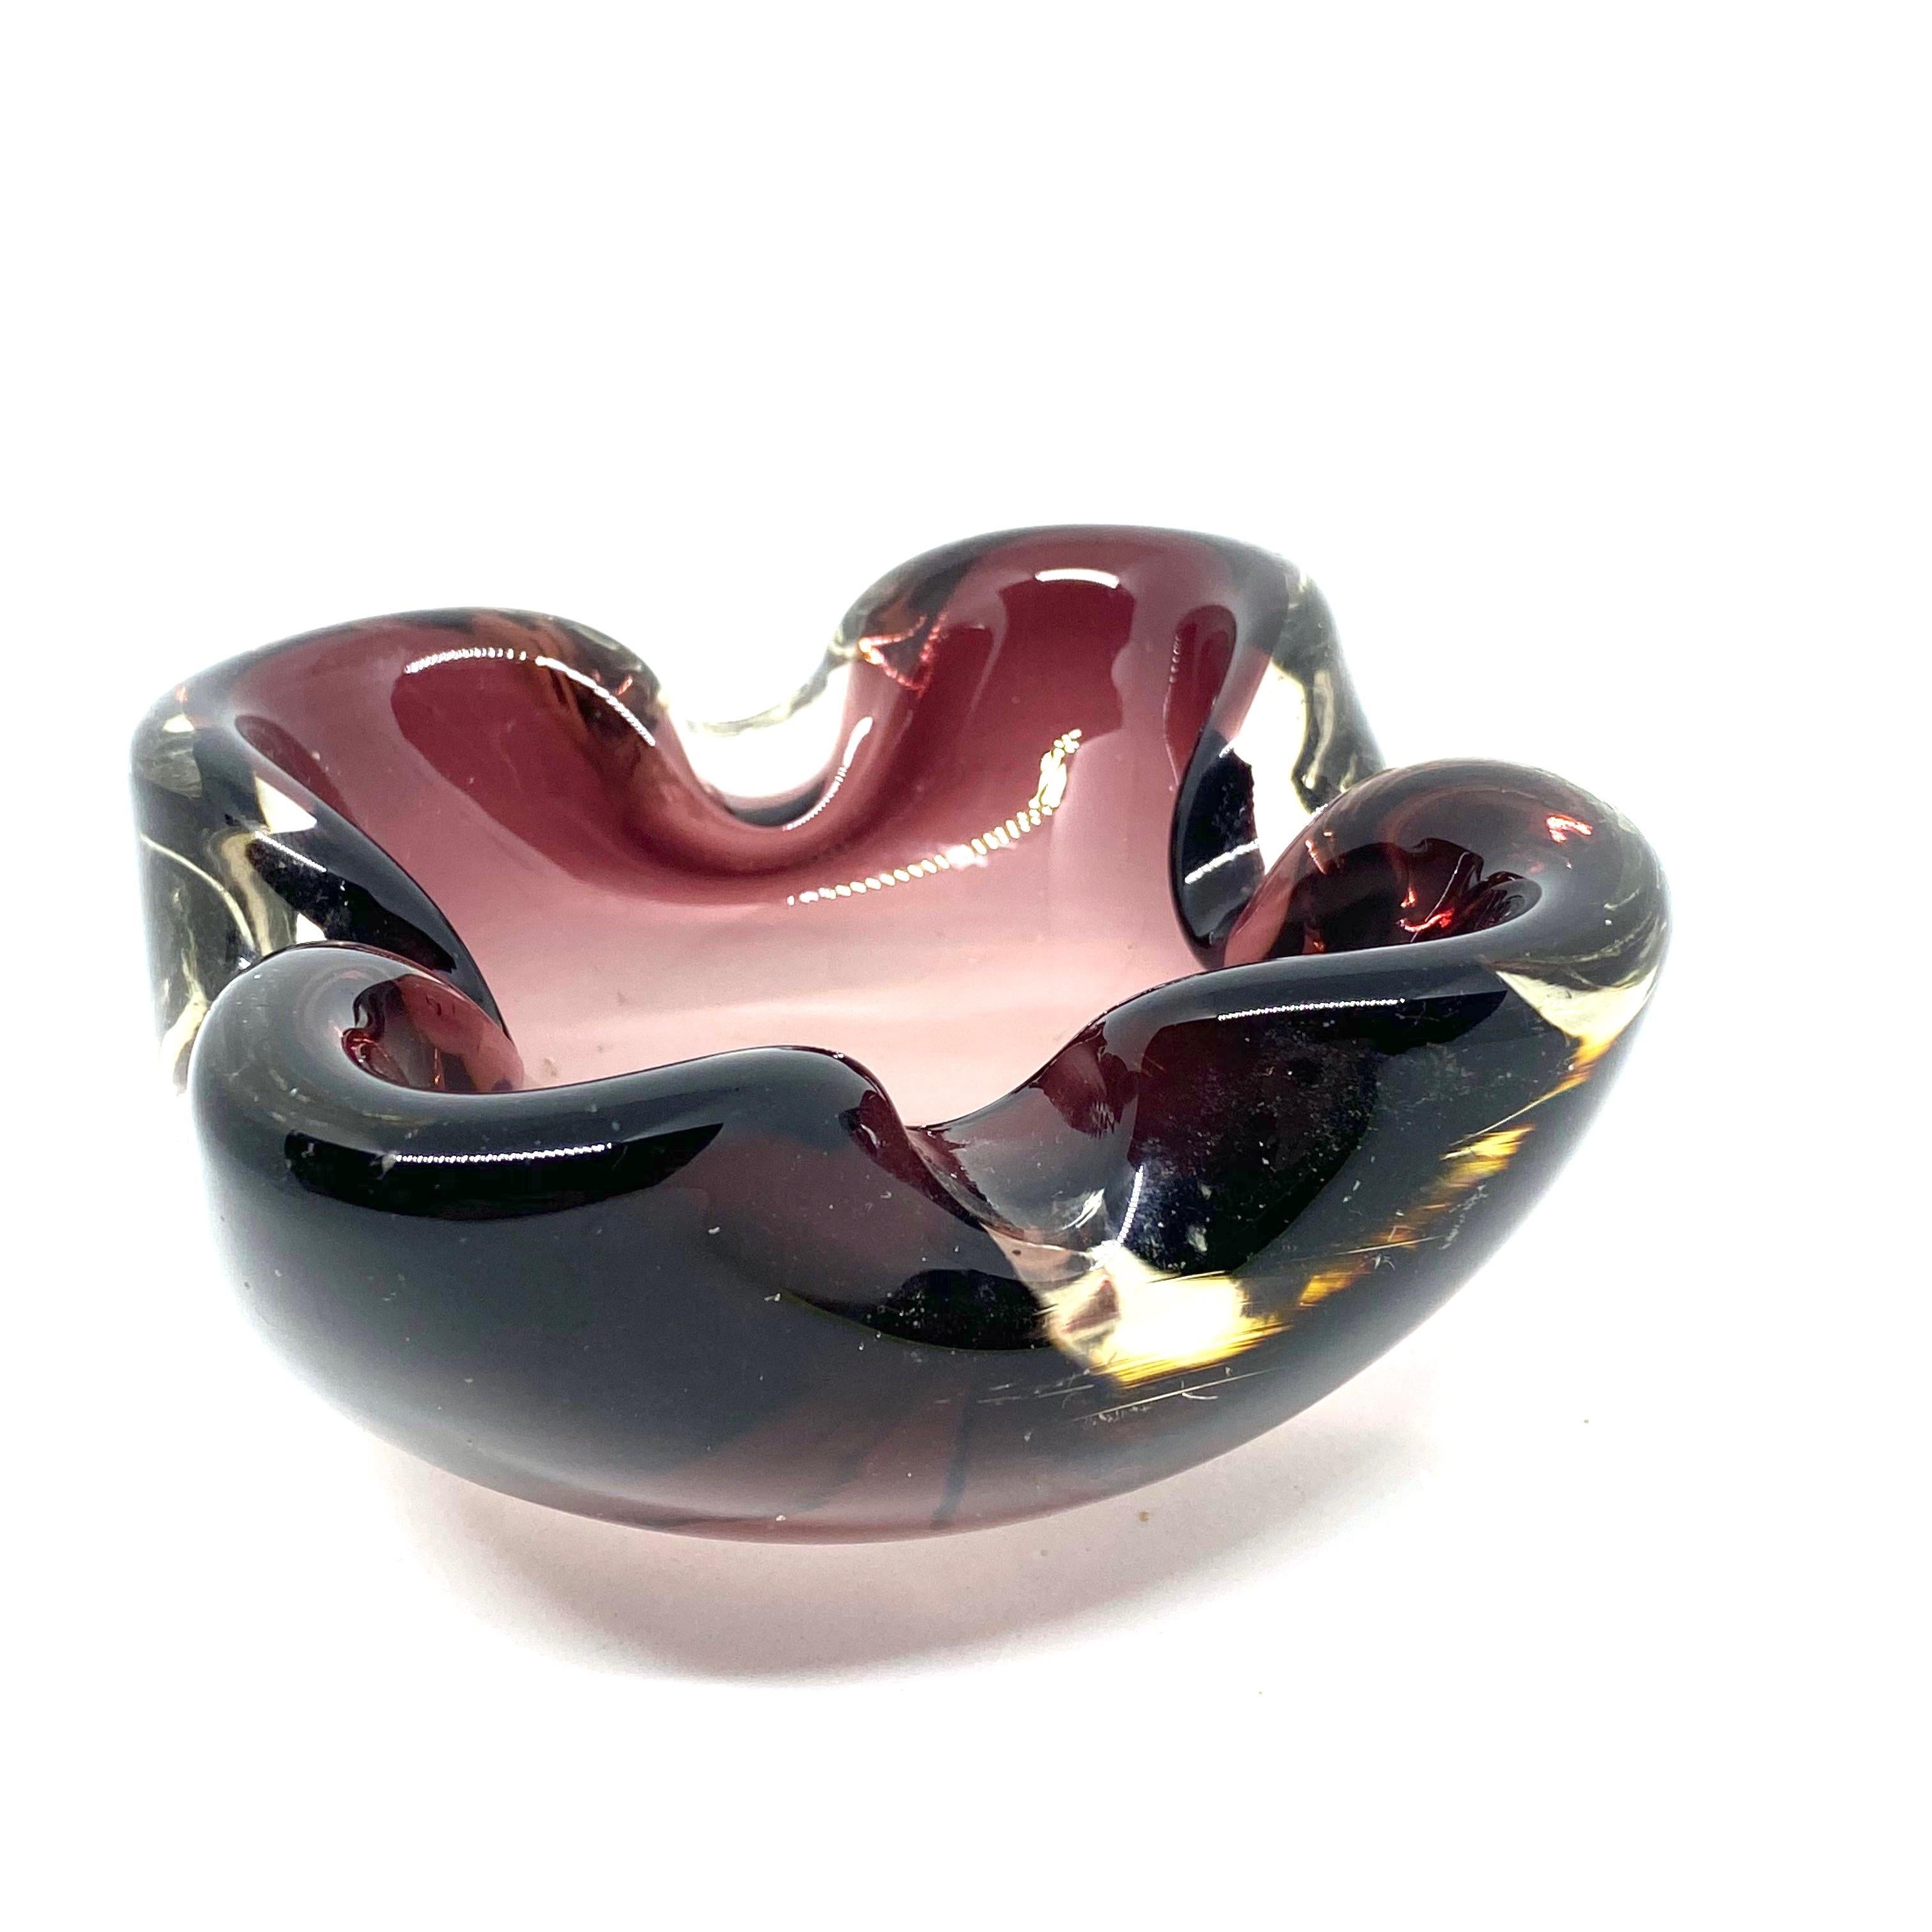 Gorgeous hand blown Murano art glass piece with Sommerso and bullicante techniques. A beautiful organic shaped bowl, catchall or ashtray in purple and clear glass, Italy, 1970s.